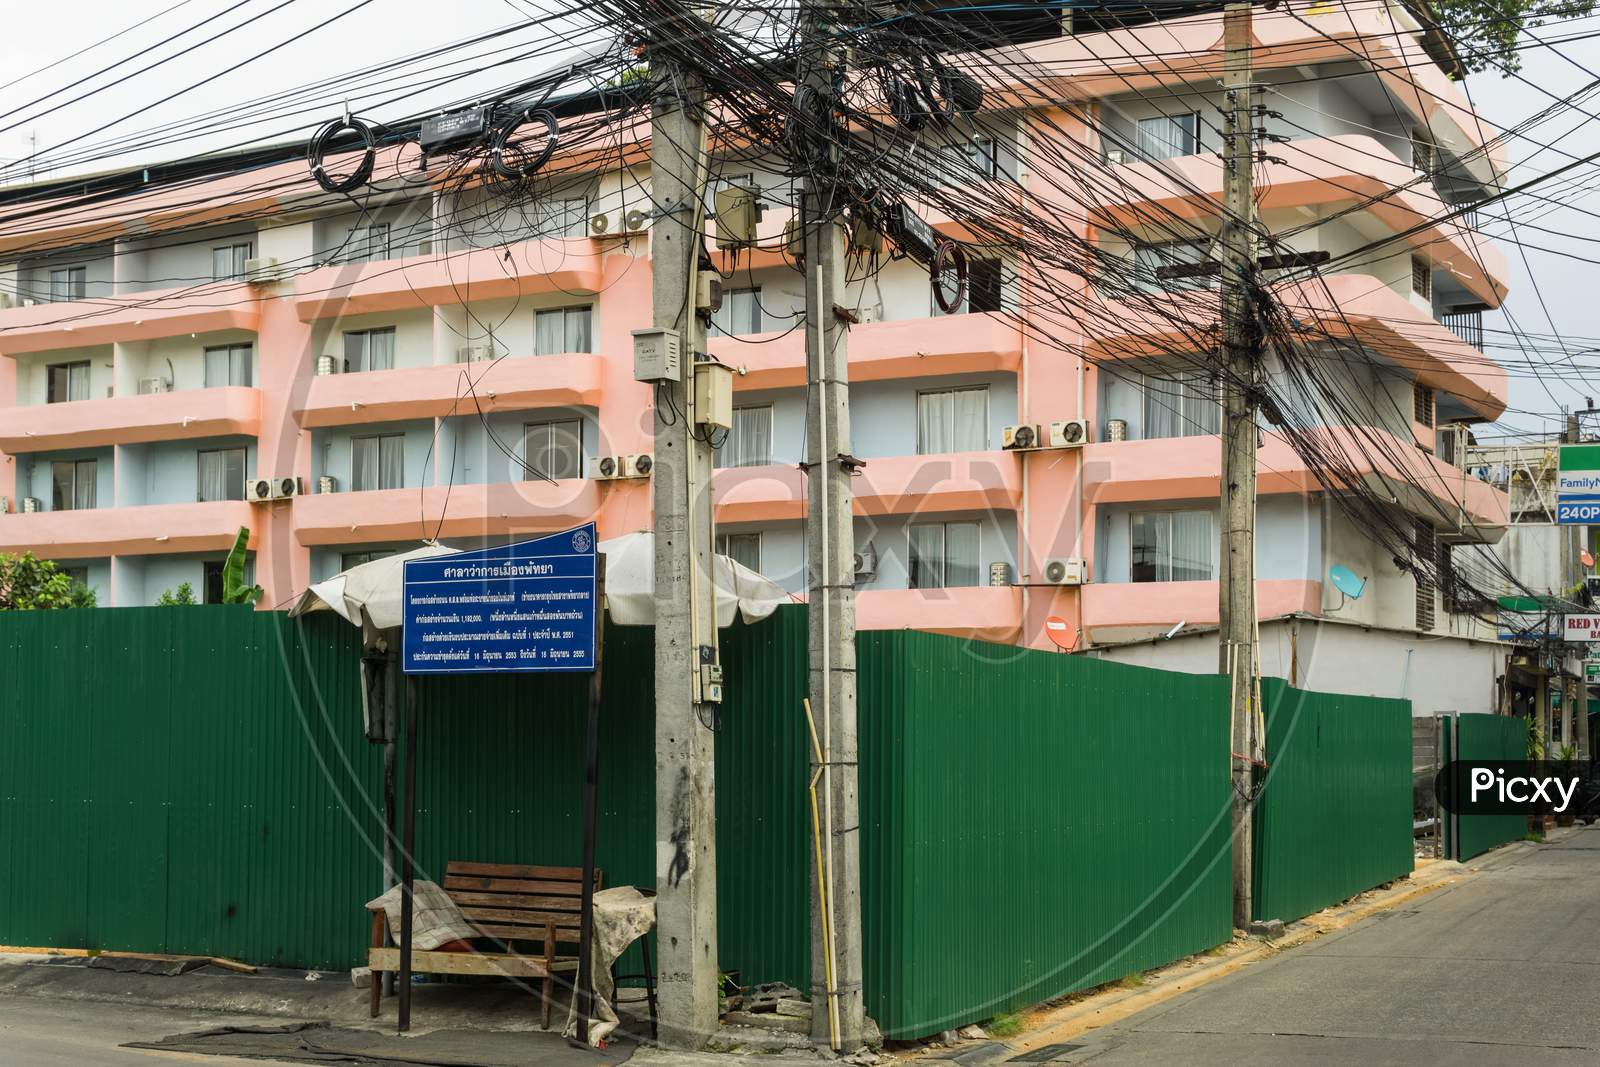 Pattaya,Thailand - October 12,2018: Soi 7 This Is A New Construction Site In The Direction To Second Road.The Old Bar Buildings Were Wrecked.